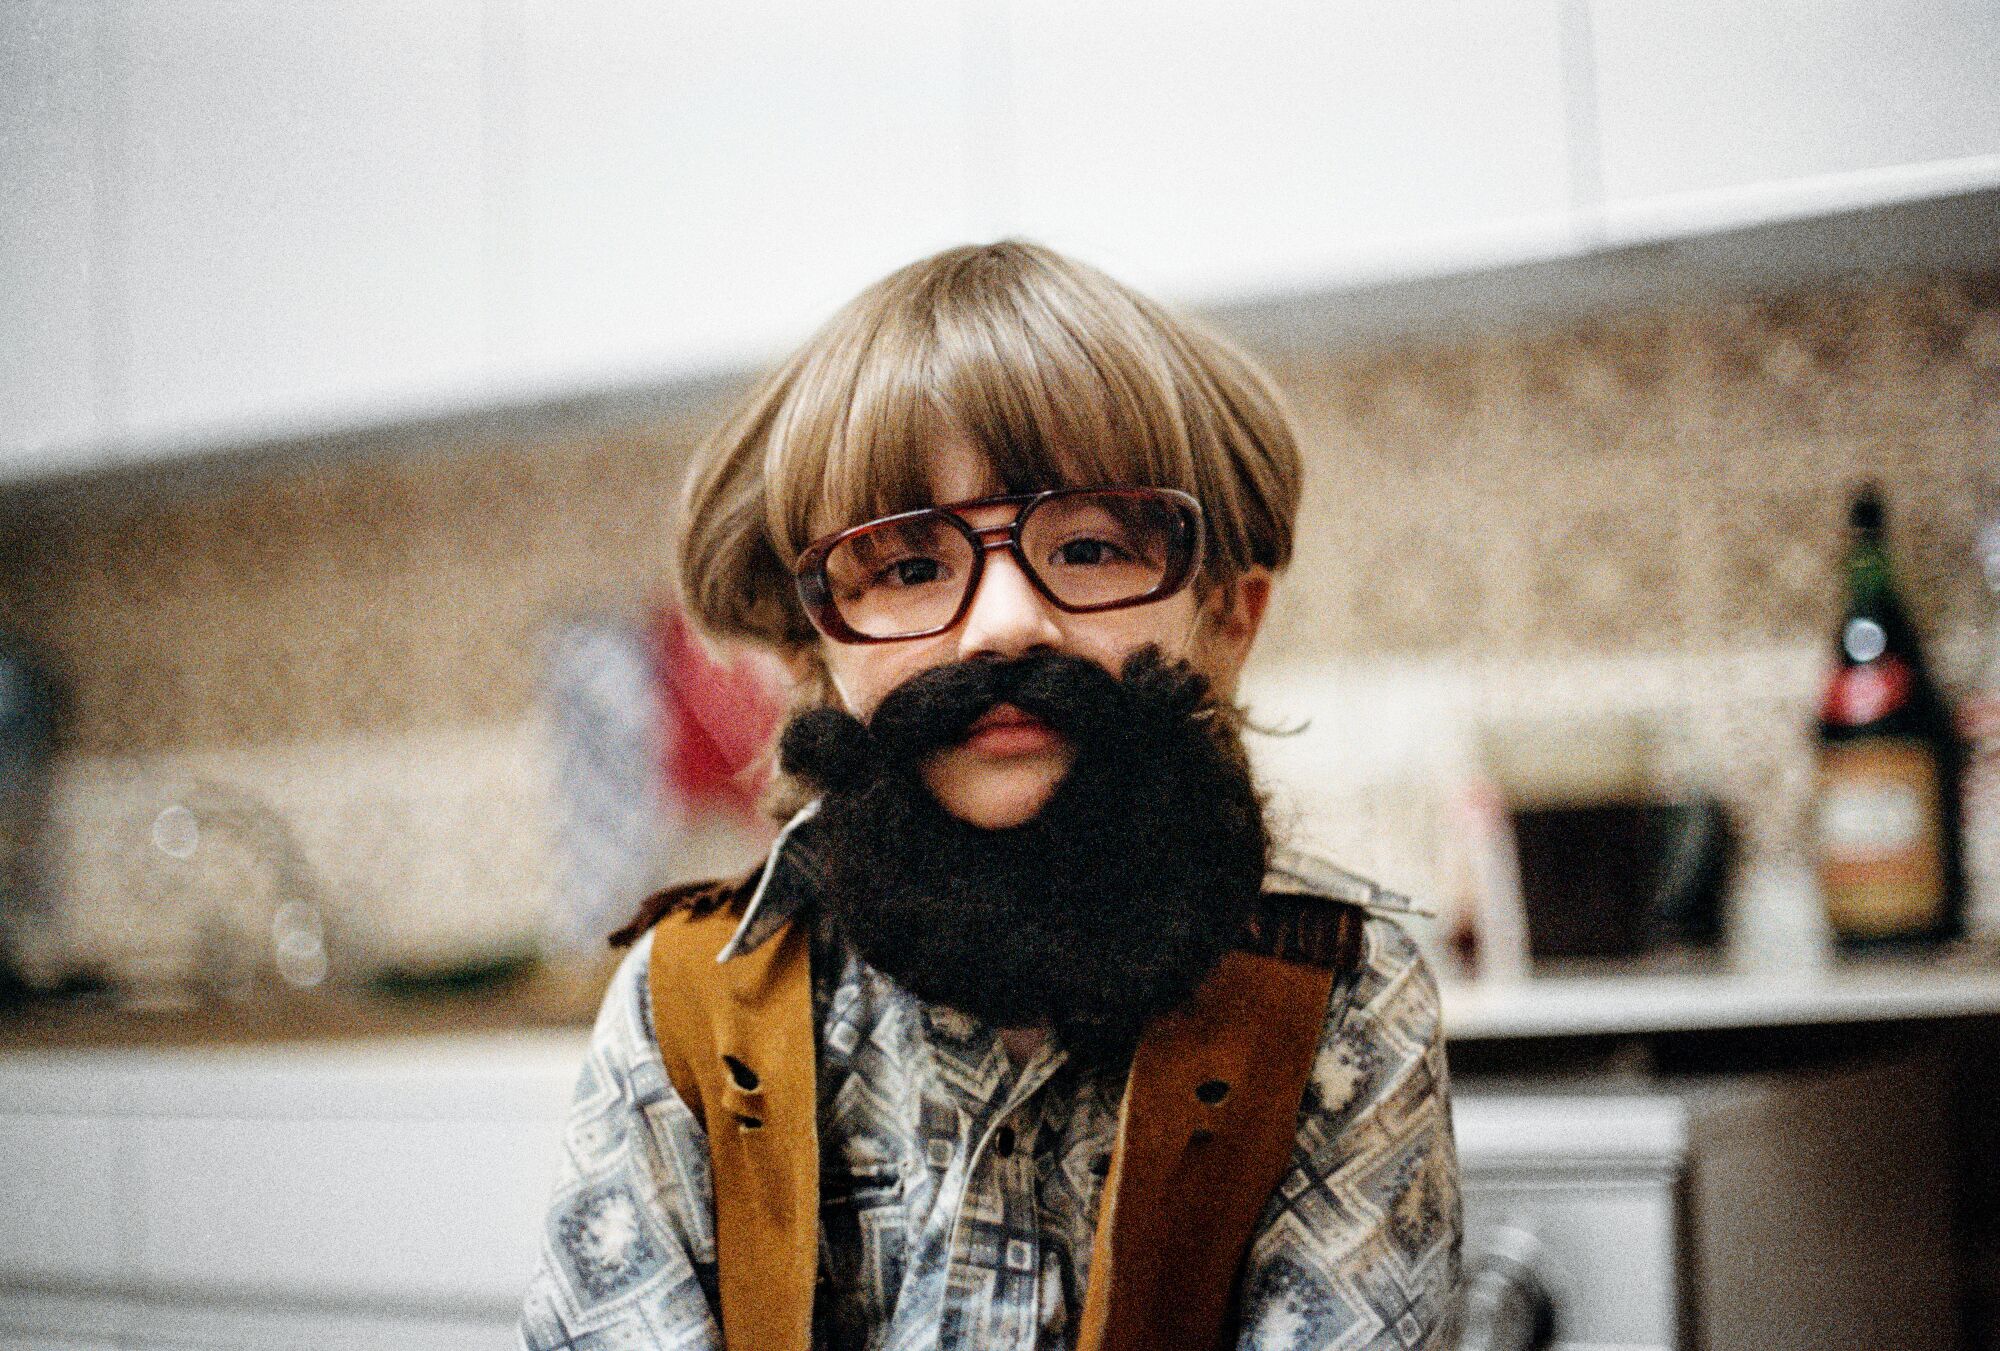 Danny Lloyd turned six during filming, and he and Leon Vitali cooked up a prank . He wore a beard to look like Kubrick.